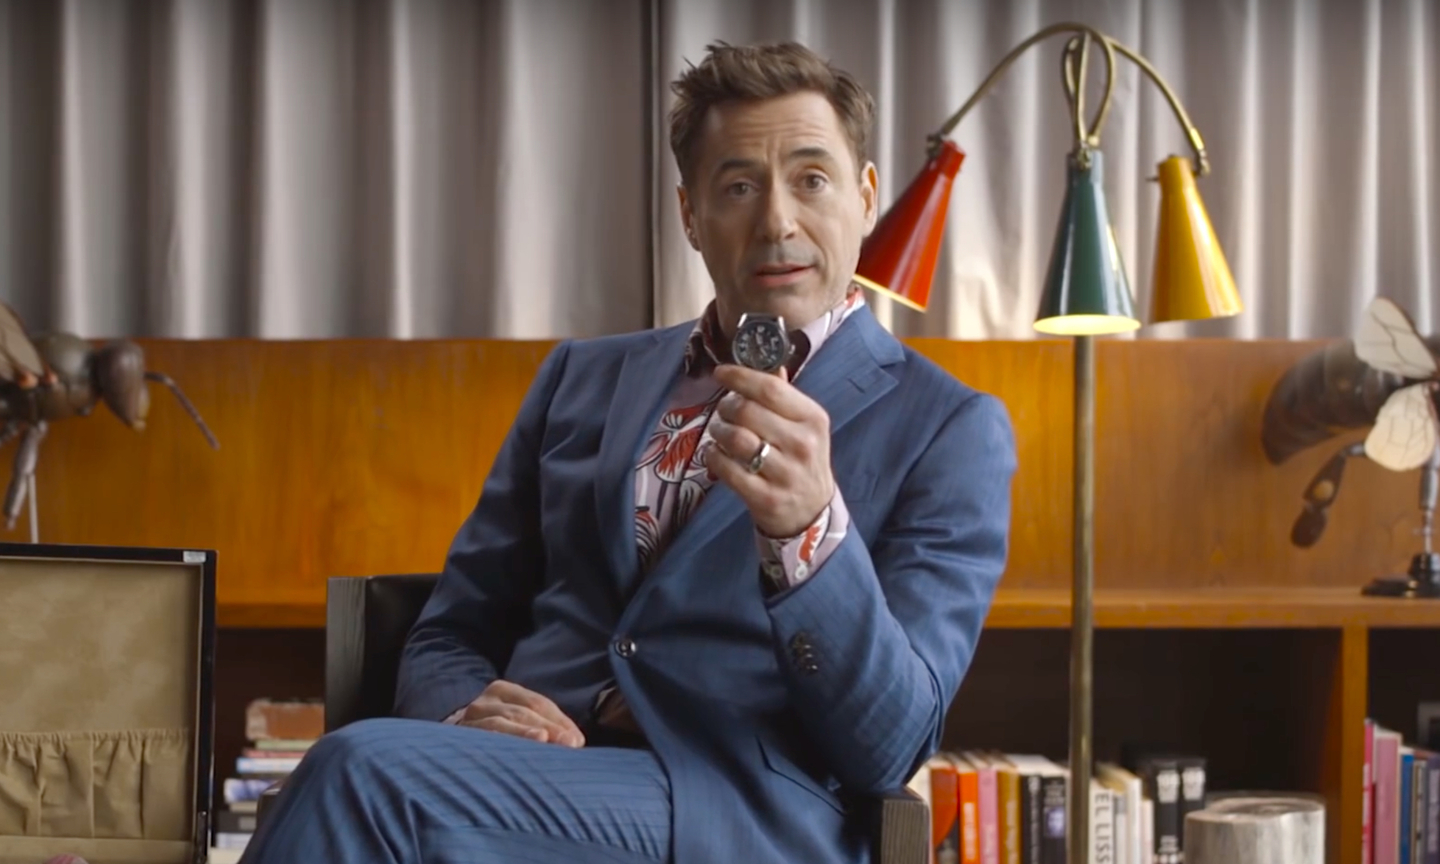 Robert Downey Jr. showed off his watch collection to GQ Style